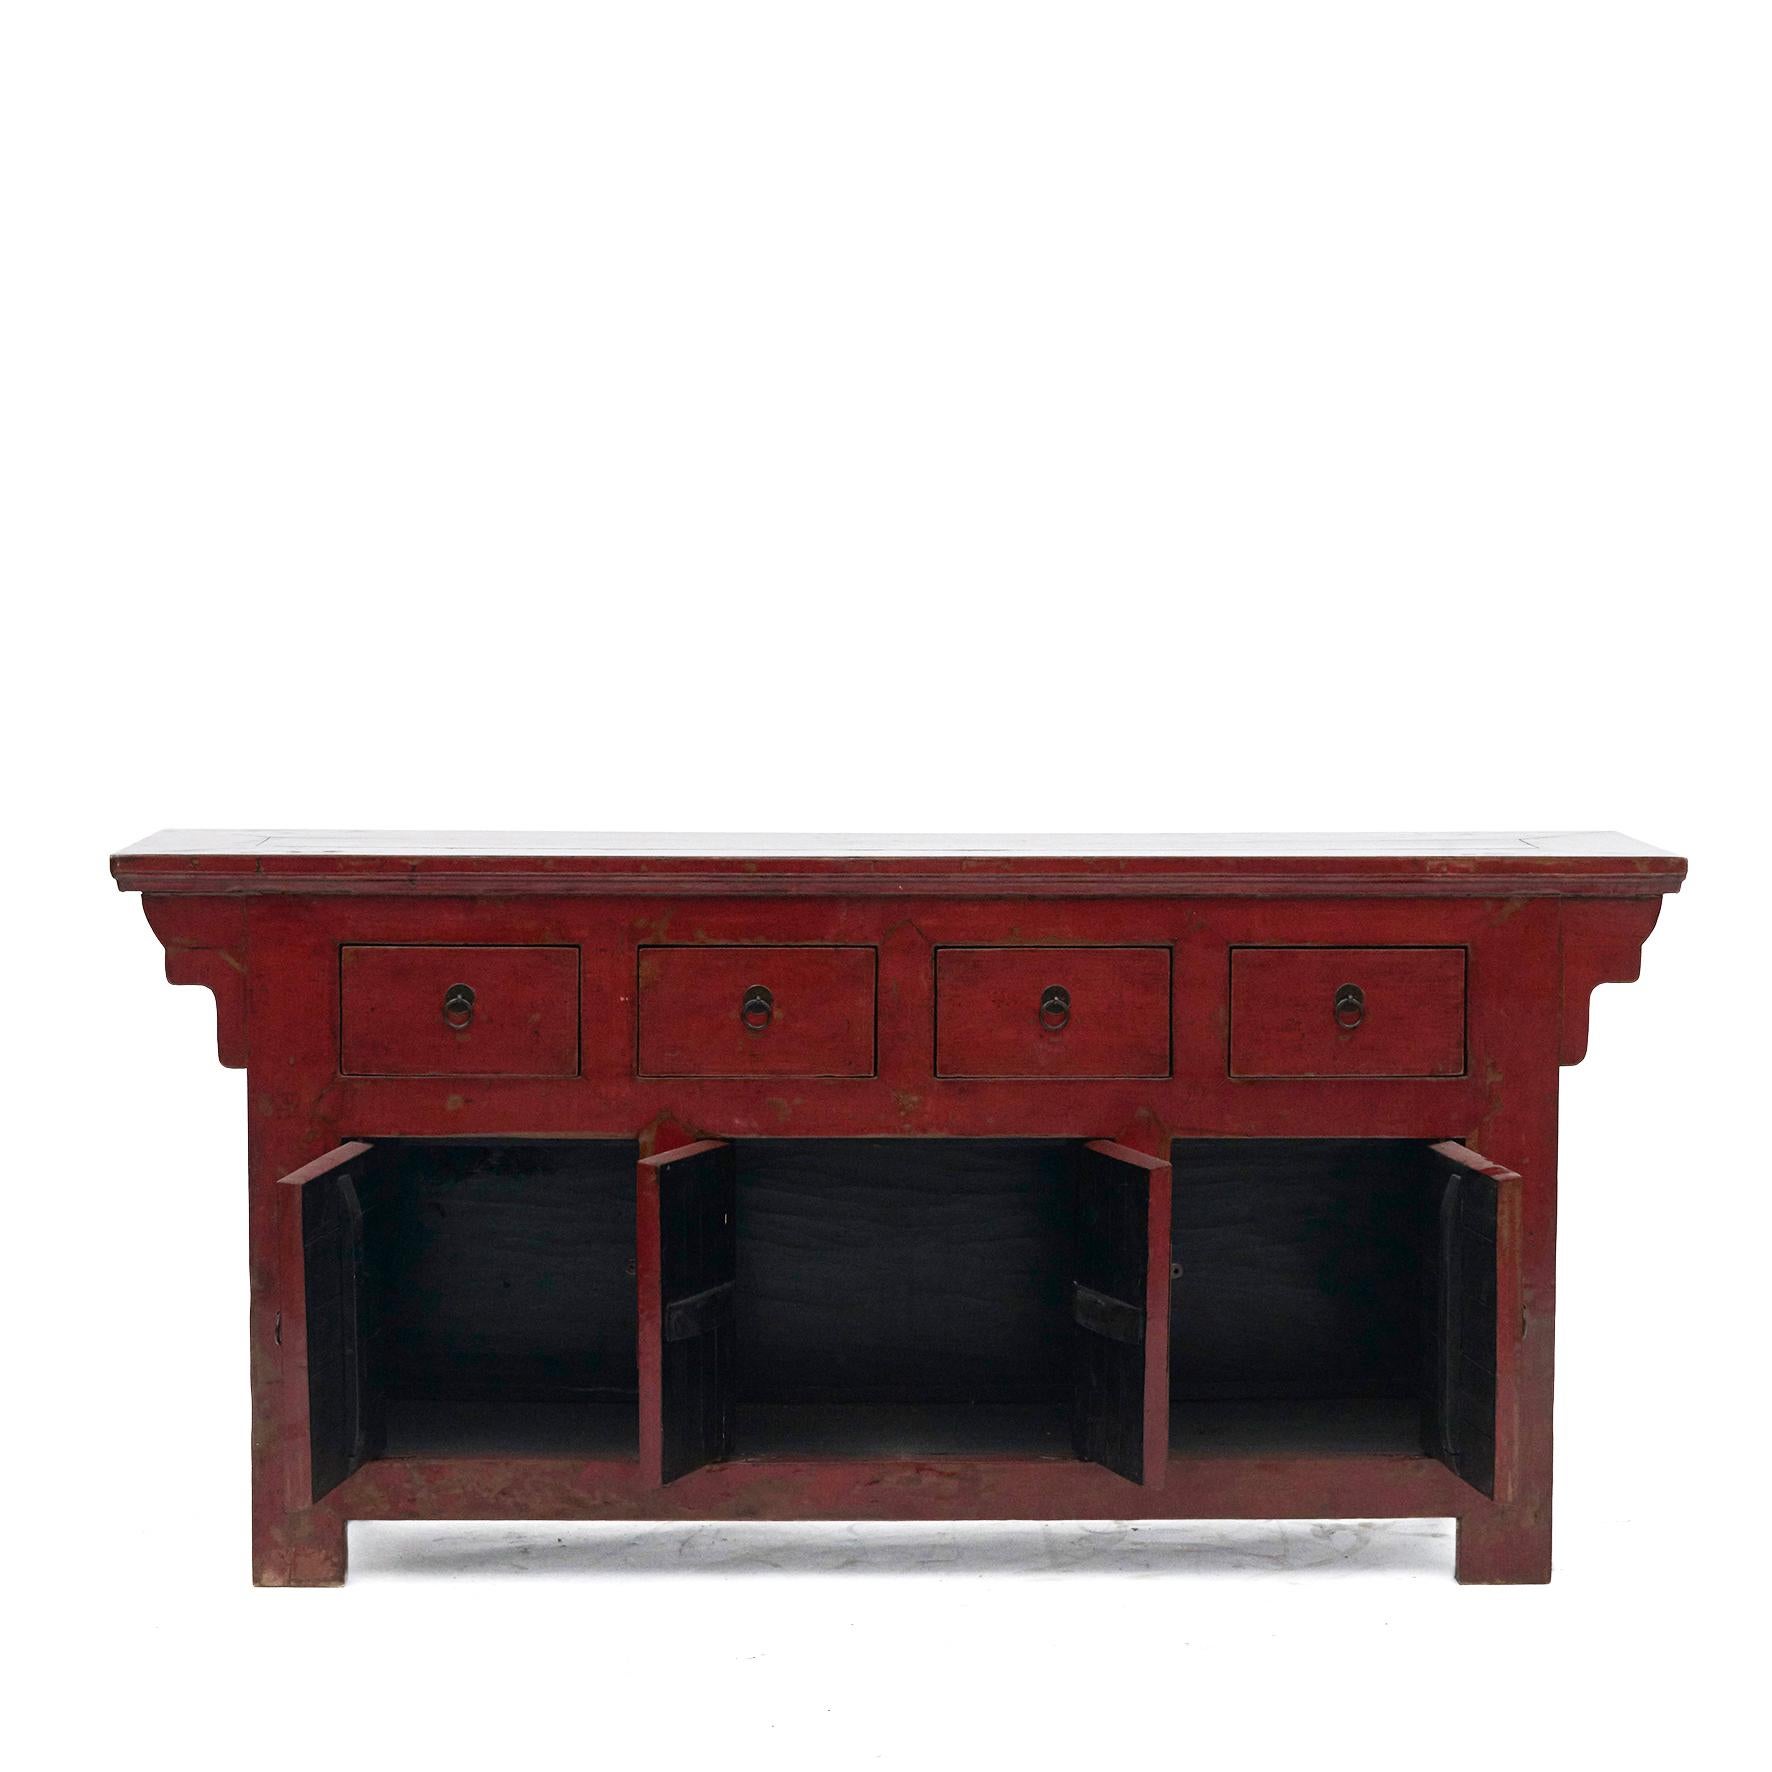 A Qing dynasty elm and red lacquer sideboard from the Chinese province of Shanxi, circa 1850-1870.

With four drawers at the top and three lower compartments consisting of a double door with metal hardware flanked by set doors.

The original red